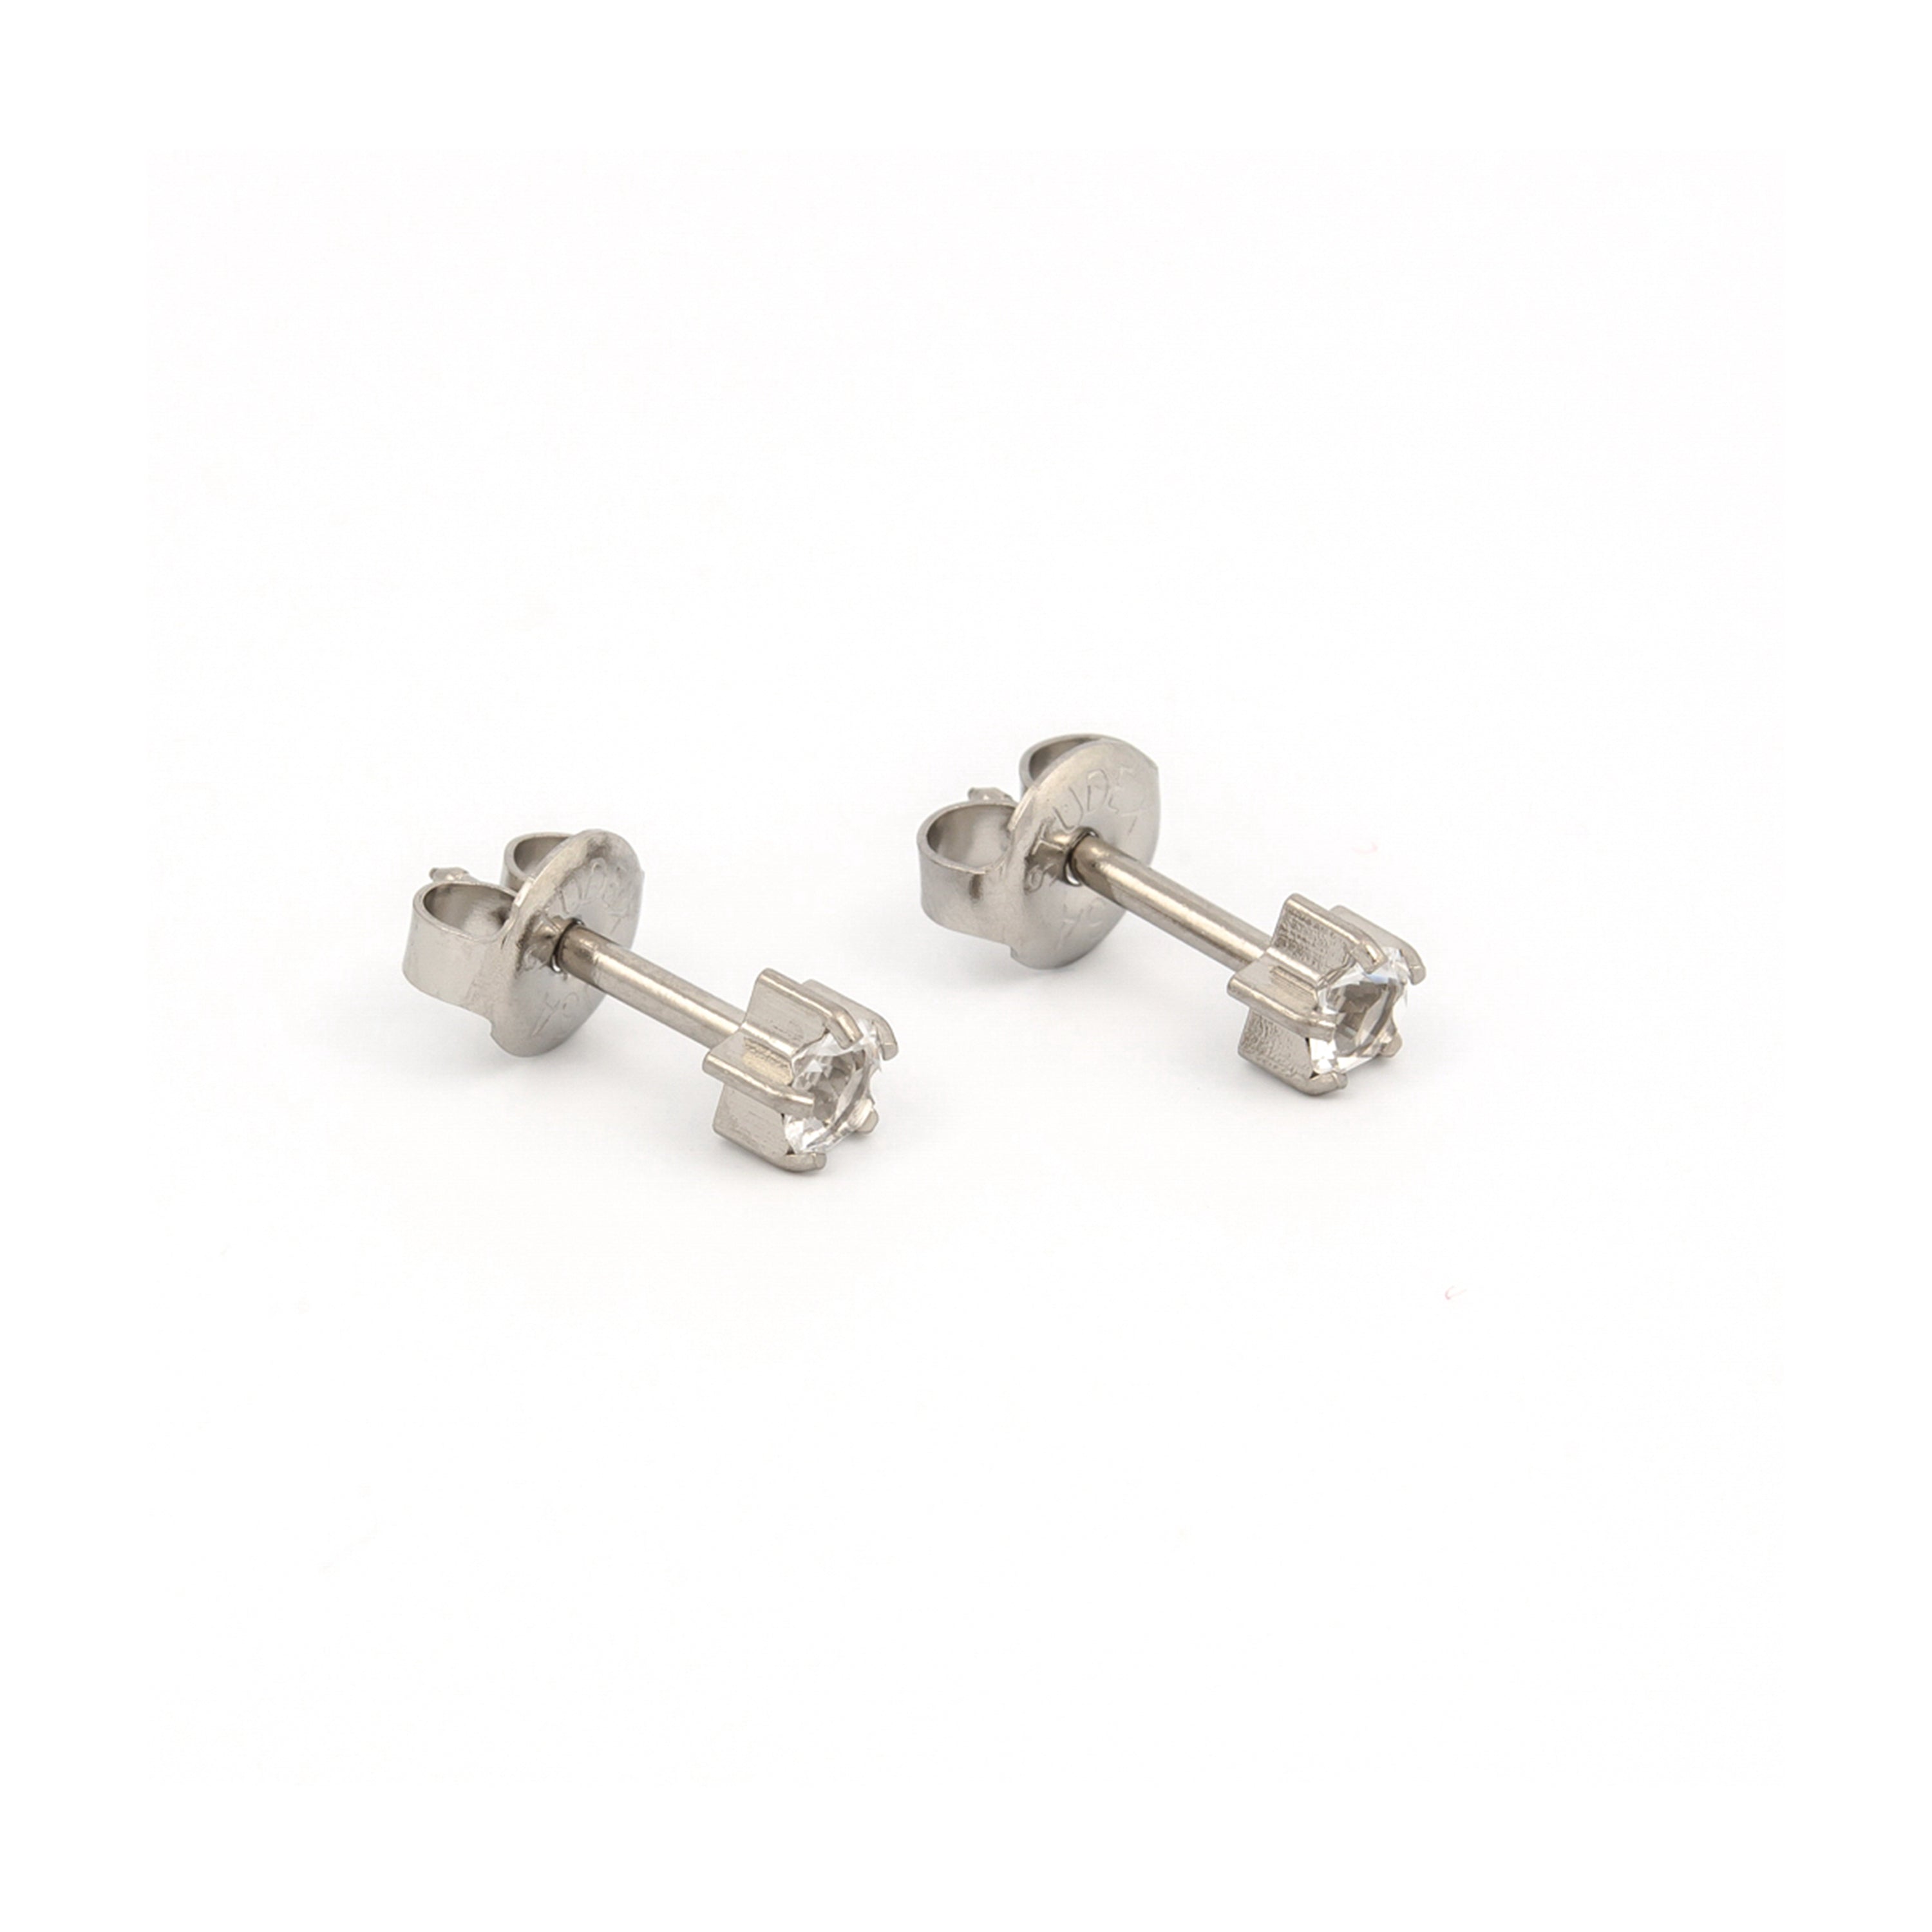 3MM April – Crystal Birthstone Allergy free Stainless Steel Ear Studs | Ideal for everyday wear